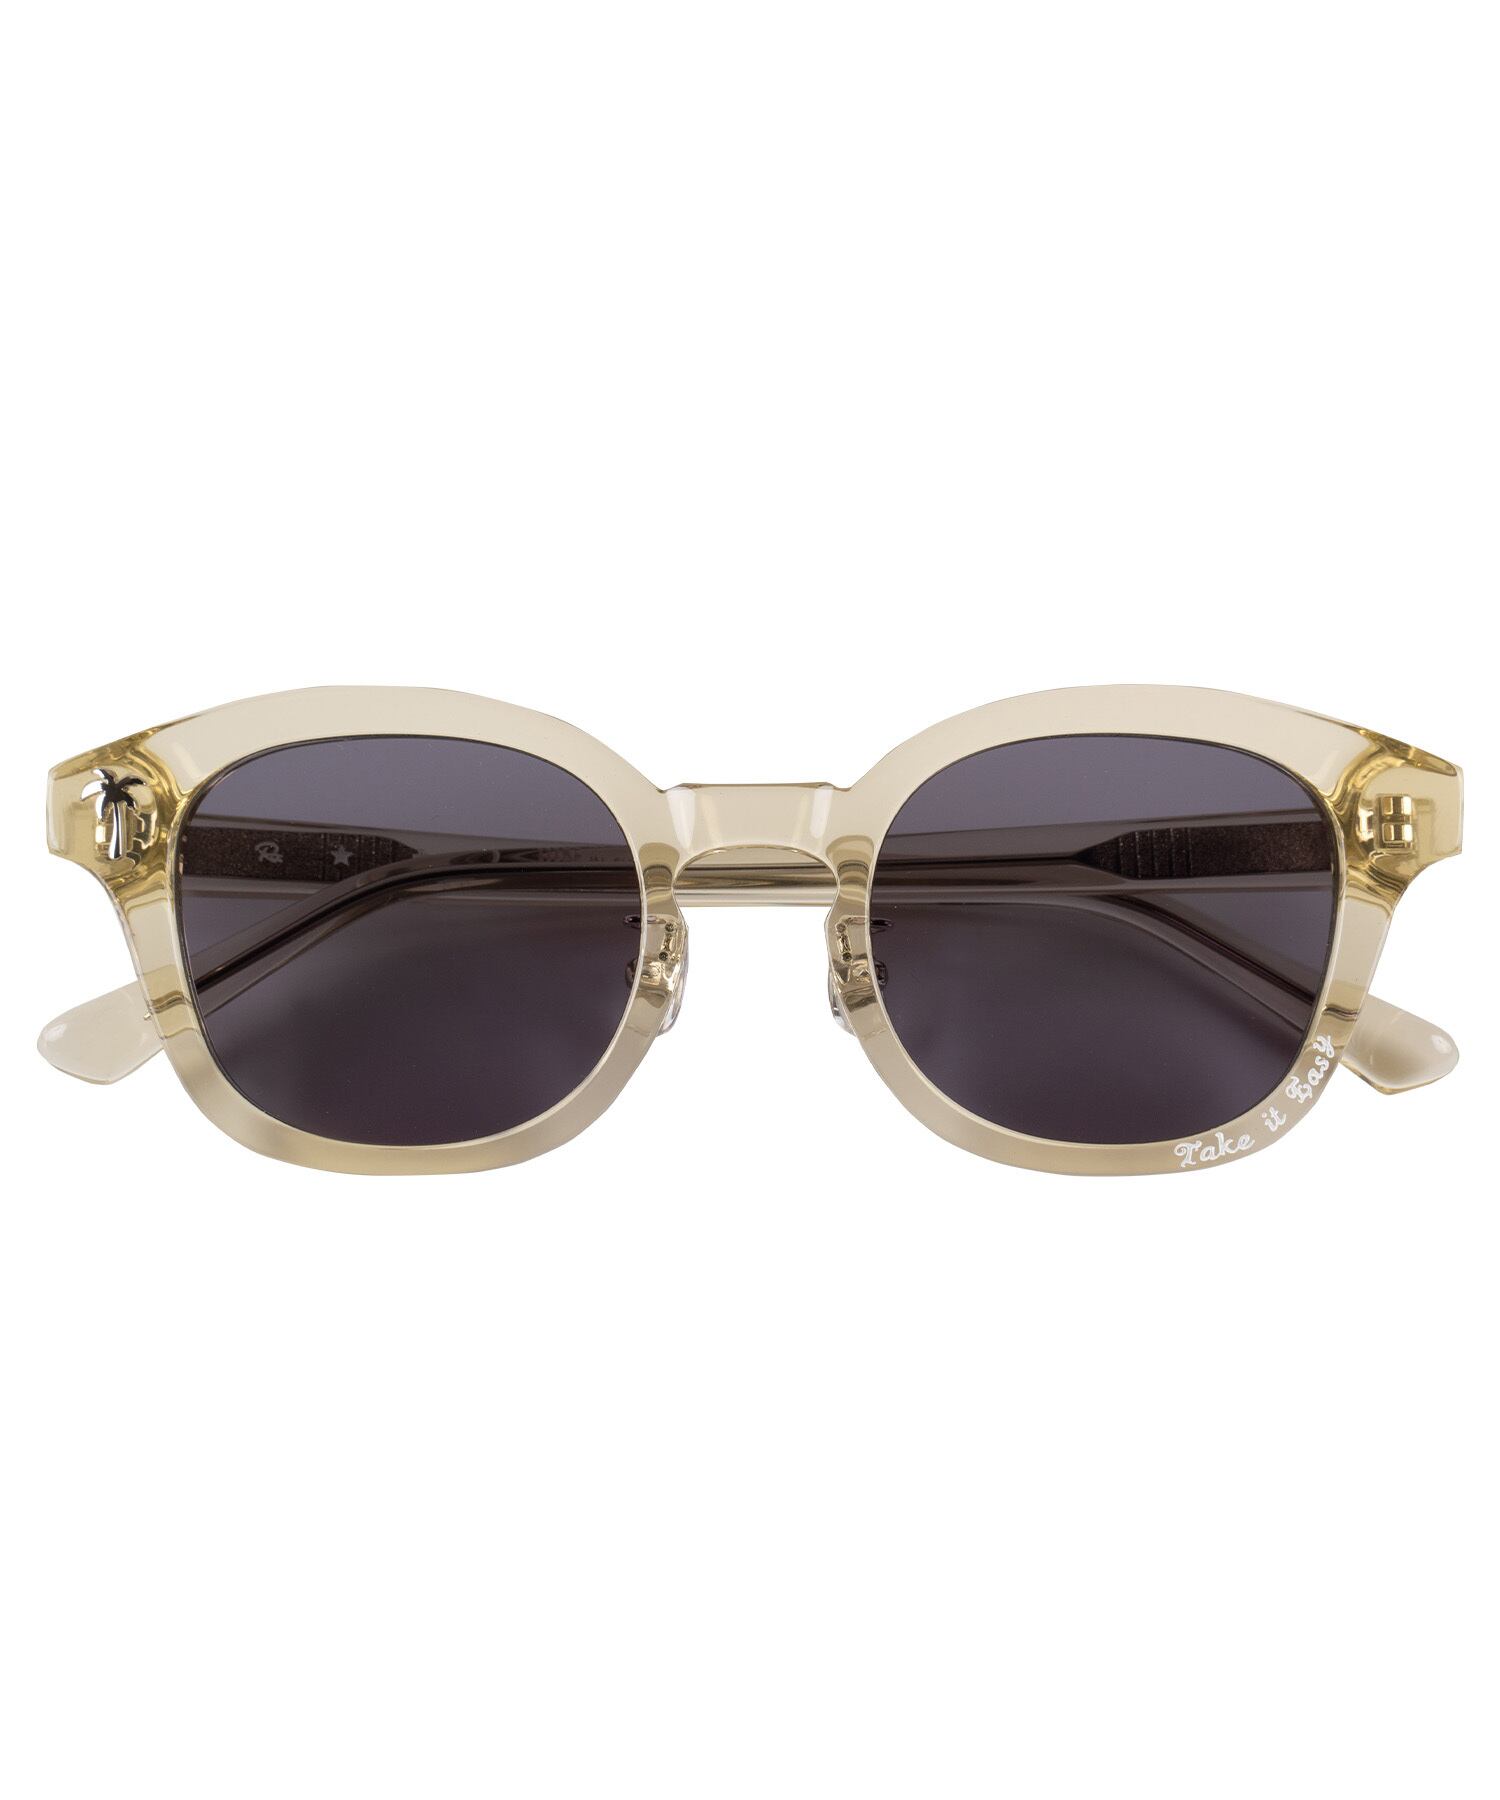 N.S.H TAKE IT EASY CLEAR FRAME SUNGLASSES FOR #Re:room［REA184］